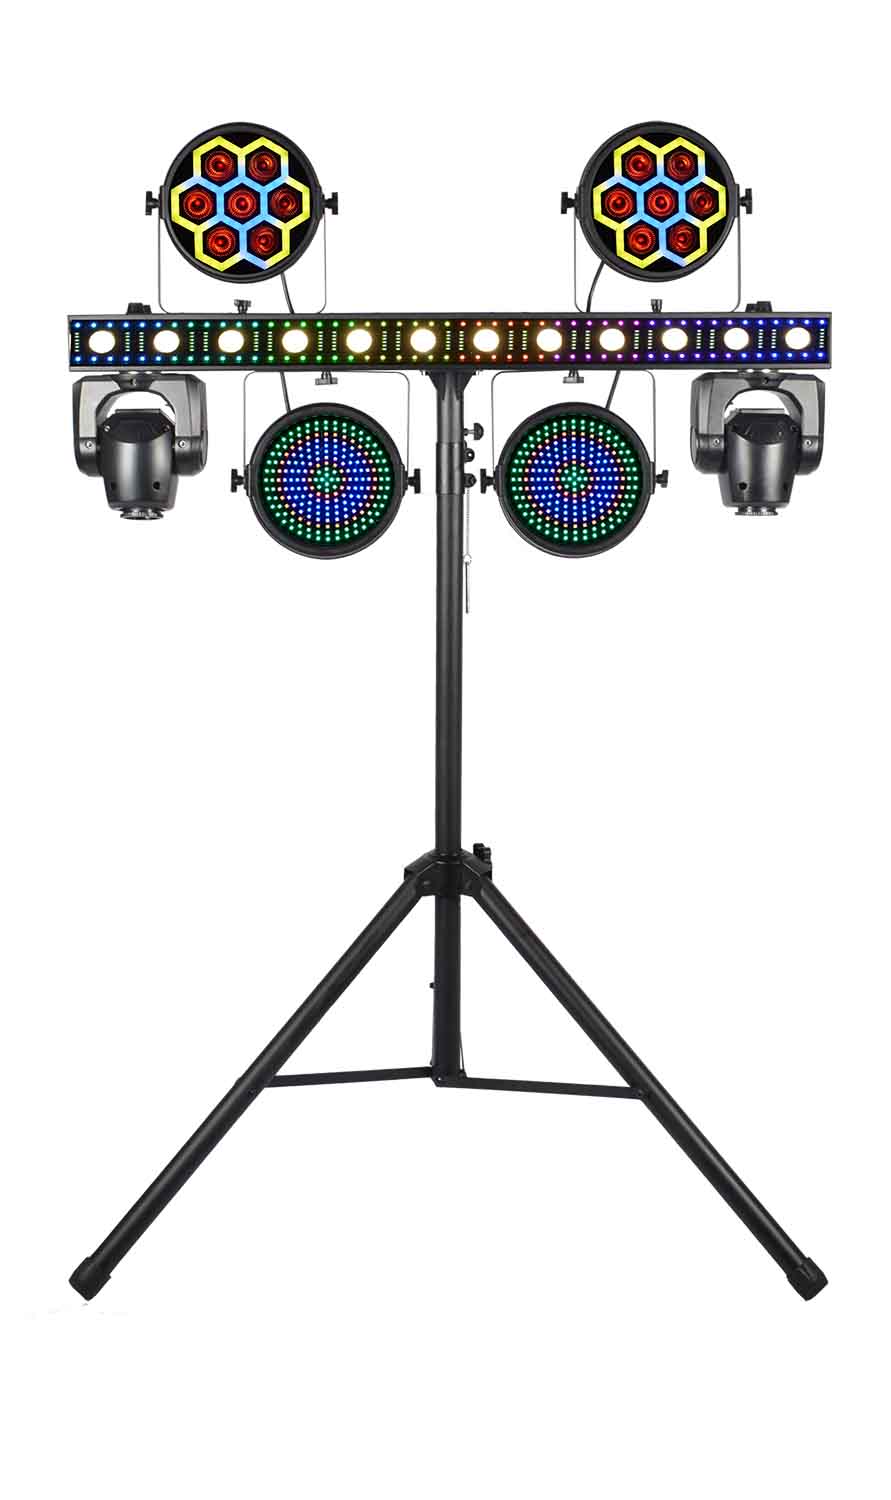 JMAZ JZ2008 Versa Flex Bar All-In-One Lighting System with 2 Movers and FX Bar - Hollywood DJ